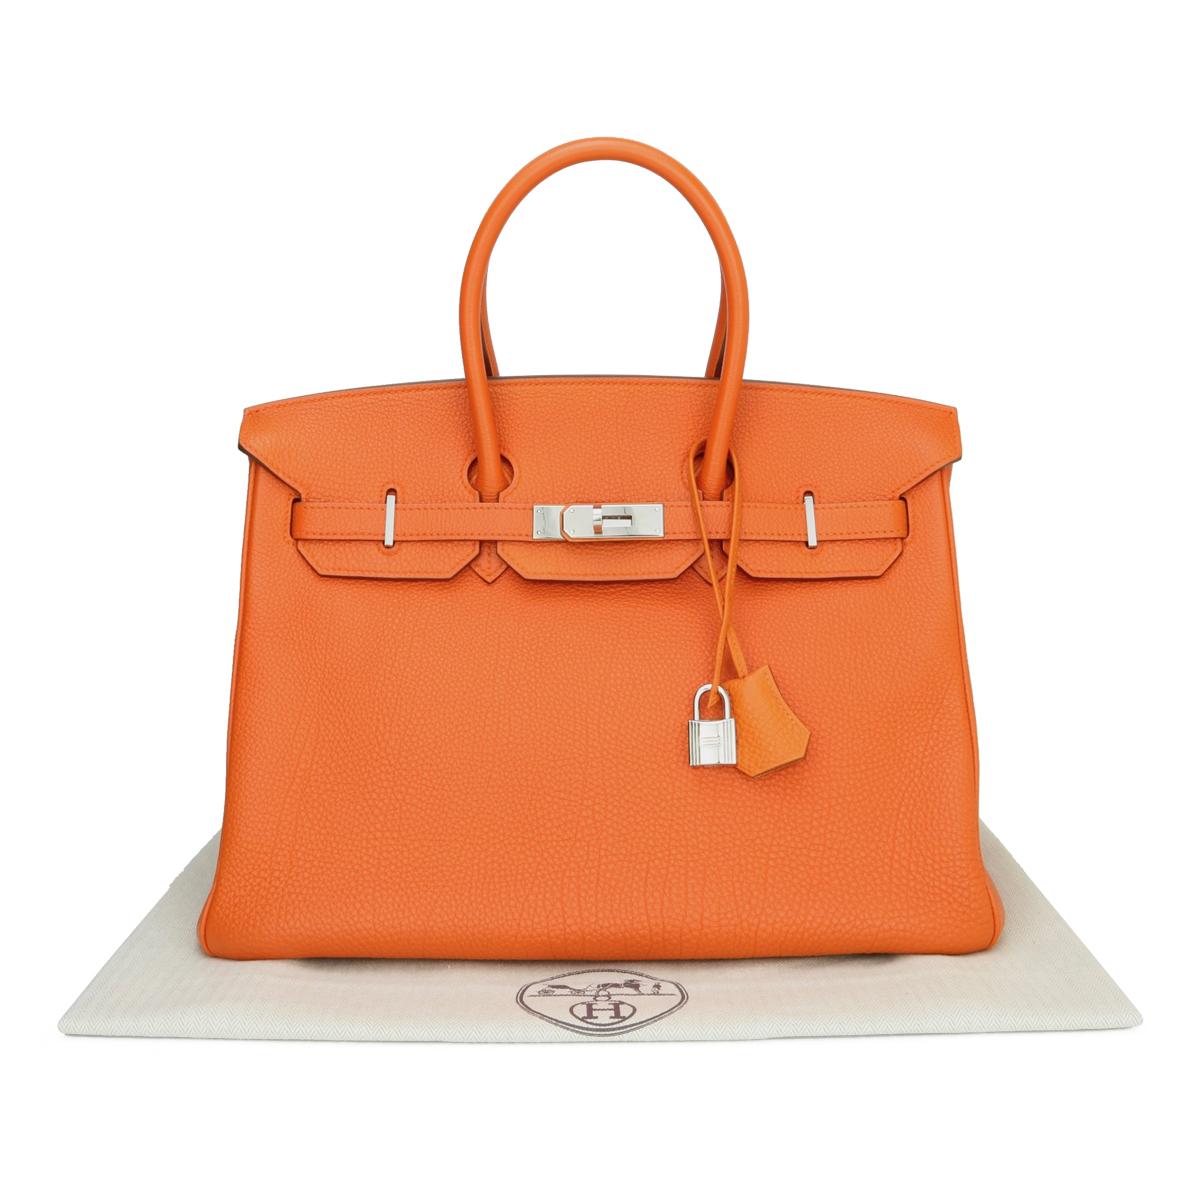 Hermès Birkin Bag 35cm Orange Togo Leather with Palladium Hardware Stamp N_Year 2010.

This bag is still in very good condition. The leather still smells fresh, and it still holds to the original shape. The hardware is still very shiny.

A truly